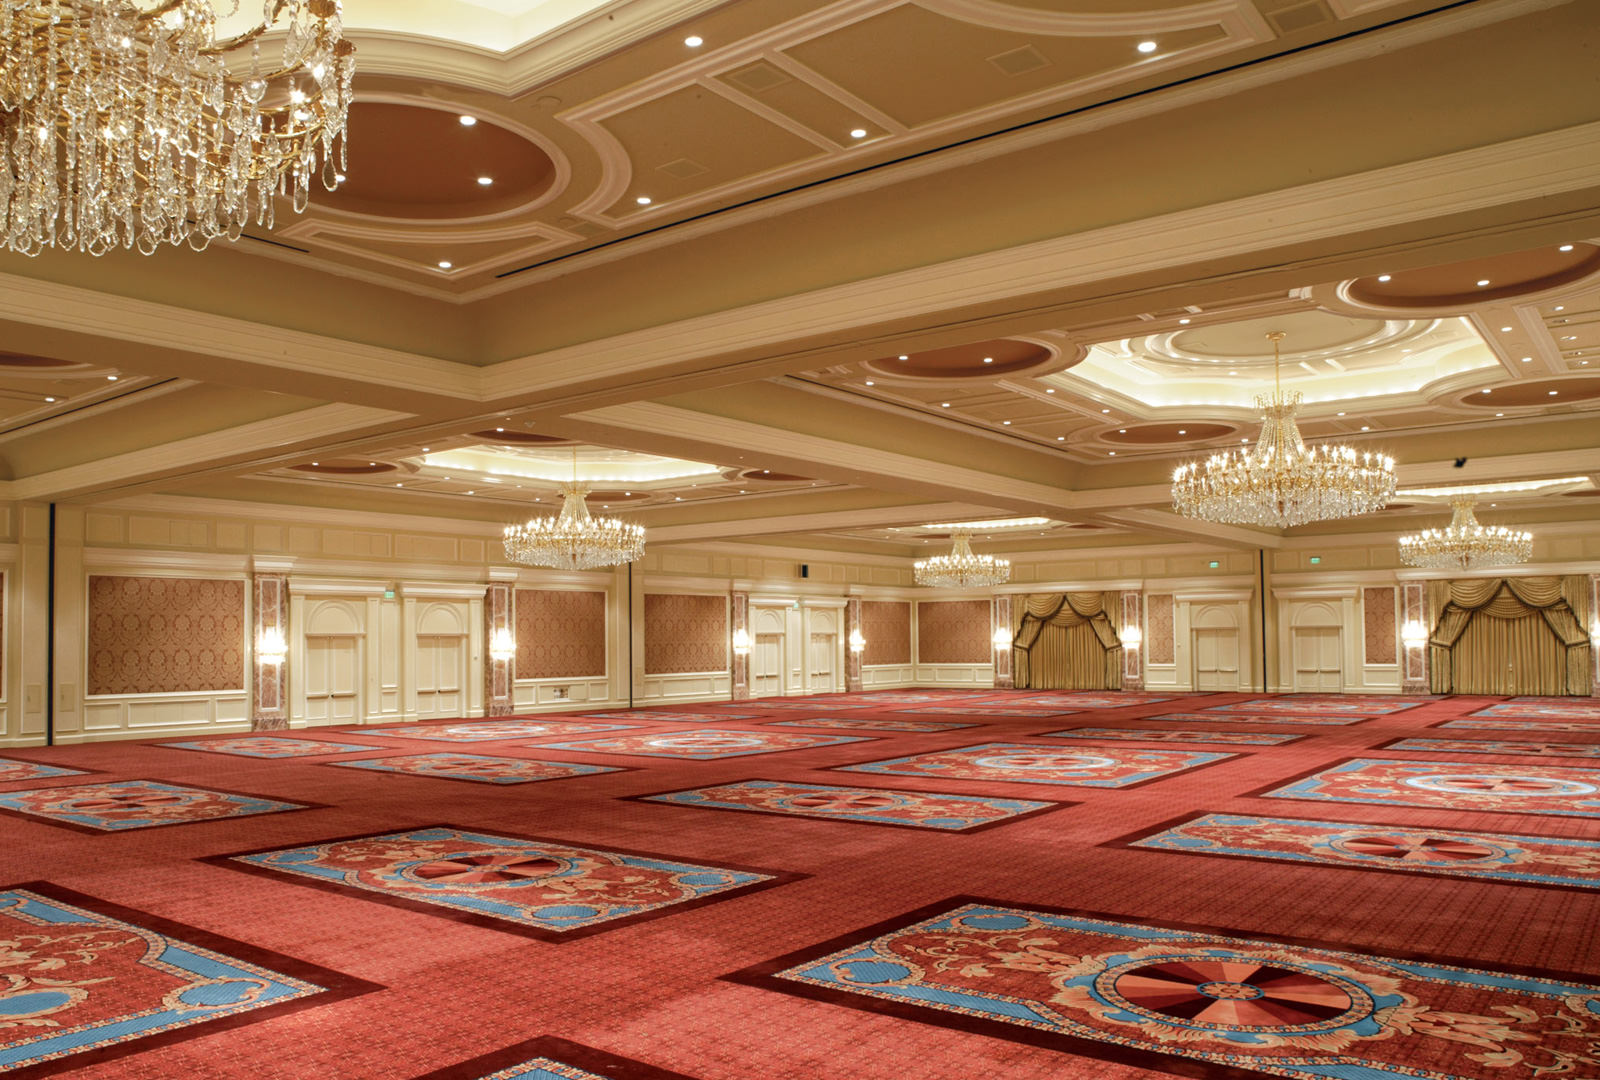 Grand Ballroom conference space for meetings and events on the first floor of The Grand America Hotel